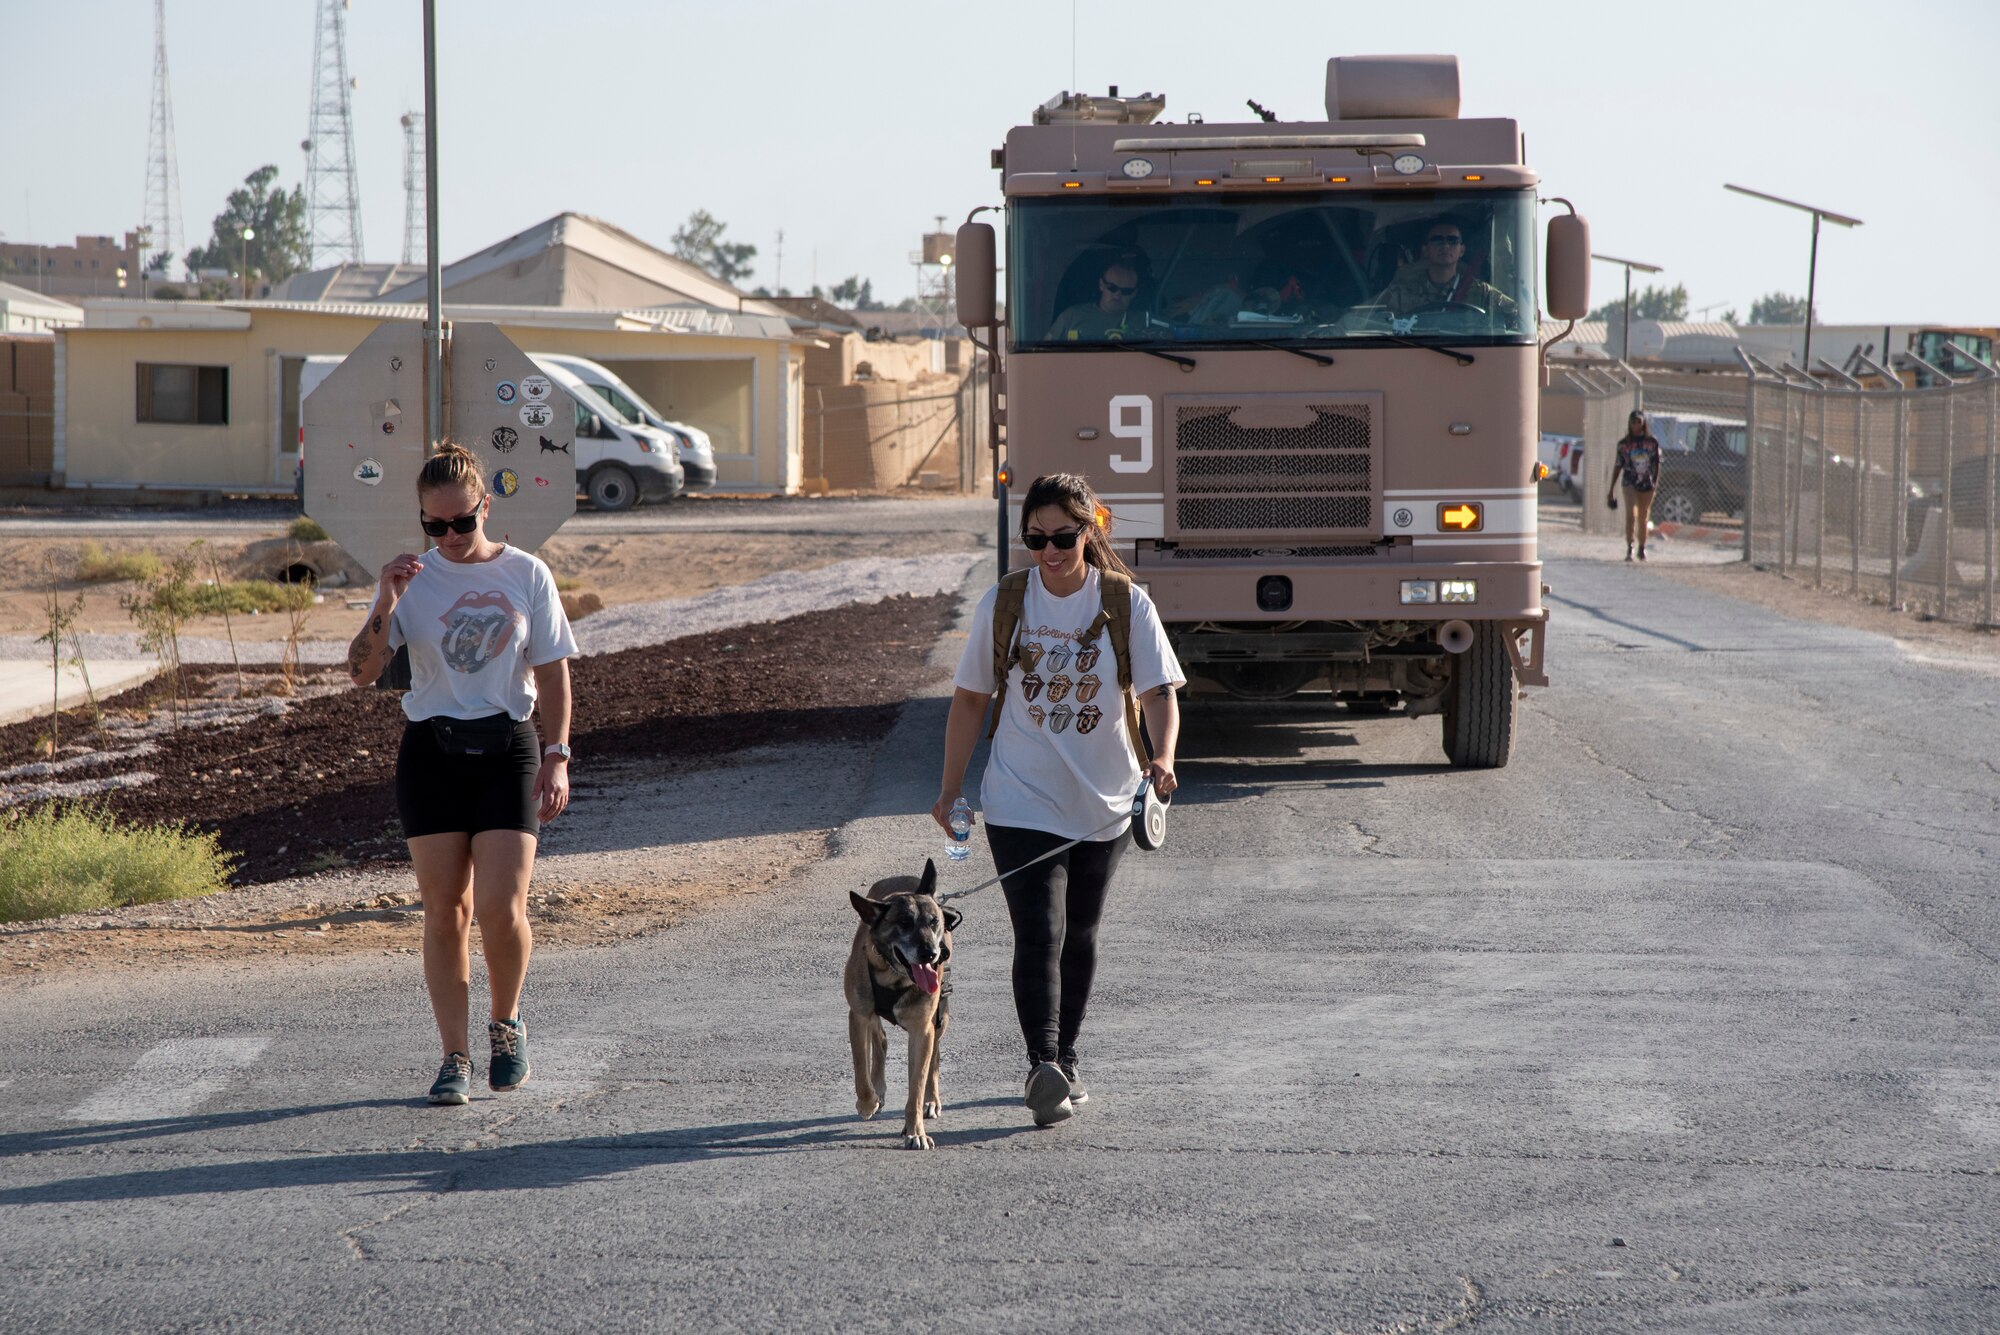 Airmen with the 332d Aerial Expeditionary Wing participate in a five kilometer run, brunch and barbecue dinner in honor of Women's Equality Day at an undisclosed location in Southwest Asia, August 26, 2022.